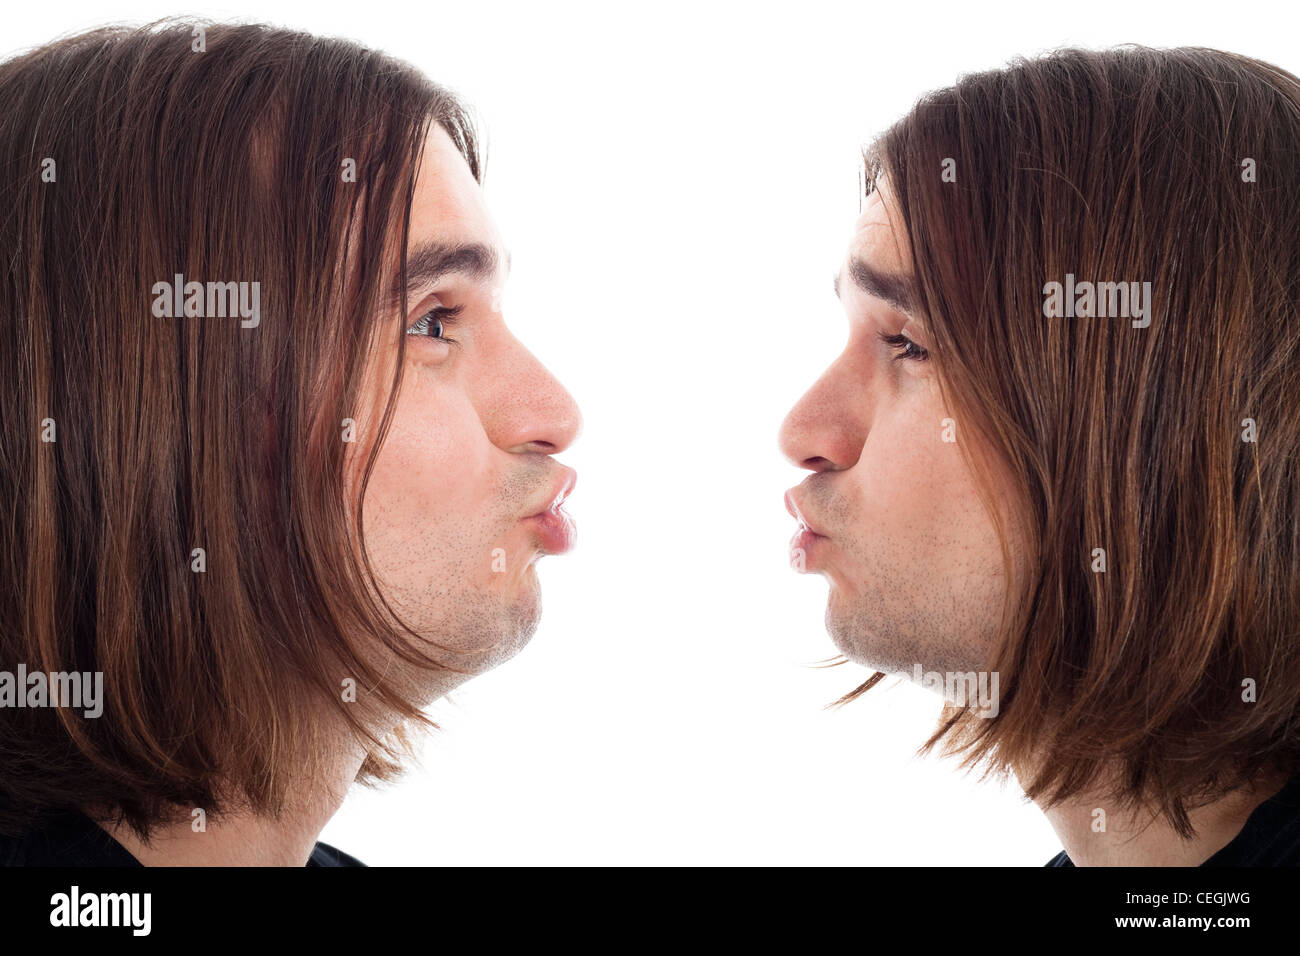 Profiles of young long haired man making kiss face, isolated on white background. Stock Photo